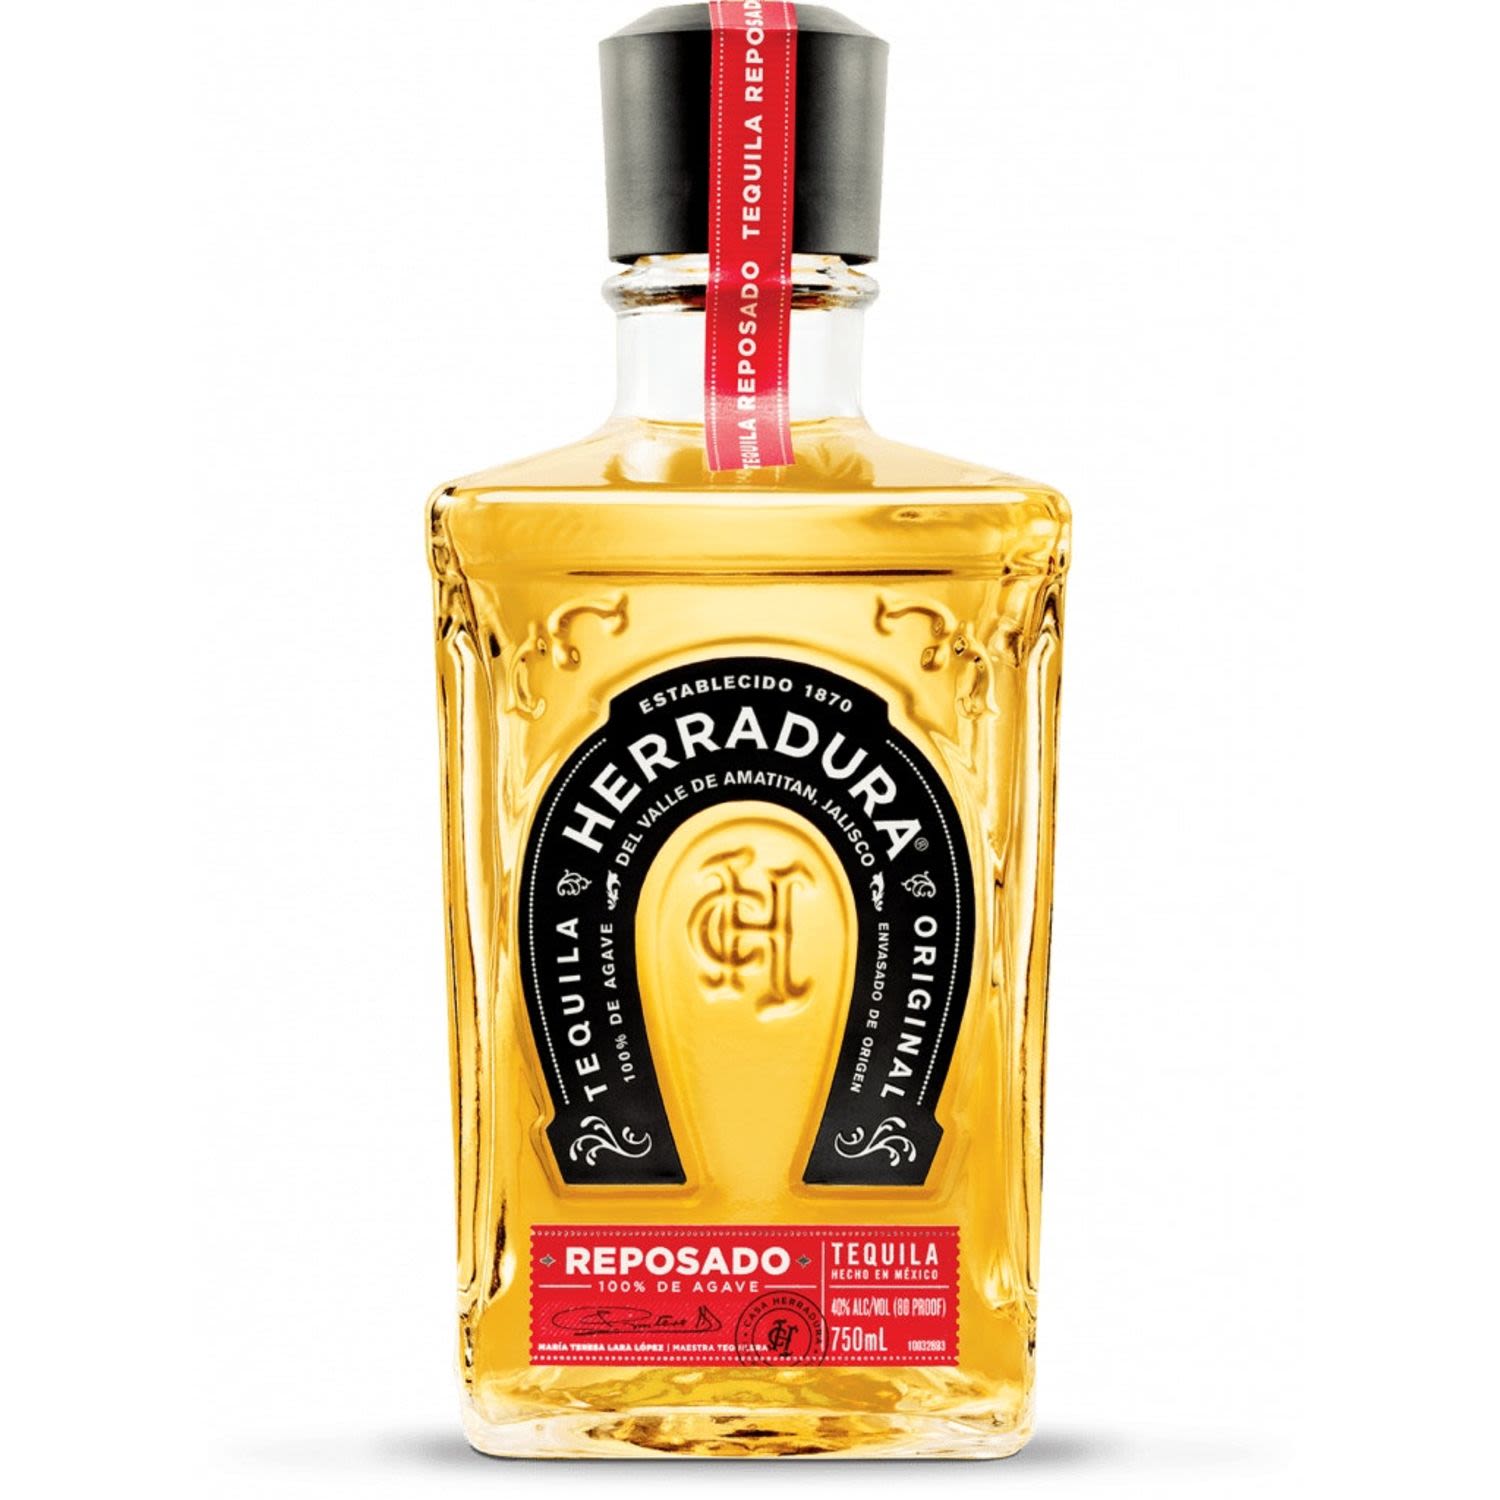 The Original Reposado. Tequila Herradura introduced the world to Reposado in 1974 and has been setting the standard ever since. Aged longer than industry standard for 11 months, Reposado has a rich amber color with notes of cooked agave, vanilla and butter. This additional time spent resting in charred American White Oak barrels creates a smooth, sweet finish with a slight taste of spice.<br /> <br />Alcohol Volume: 40.00%<br /><br />Pack Format: Bottle<br /><br />Standard Drinks: 22.1</br /><br />Pack Type: Bottle<br />